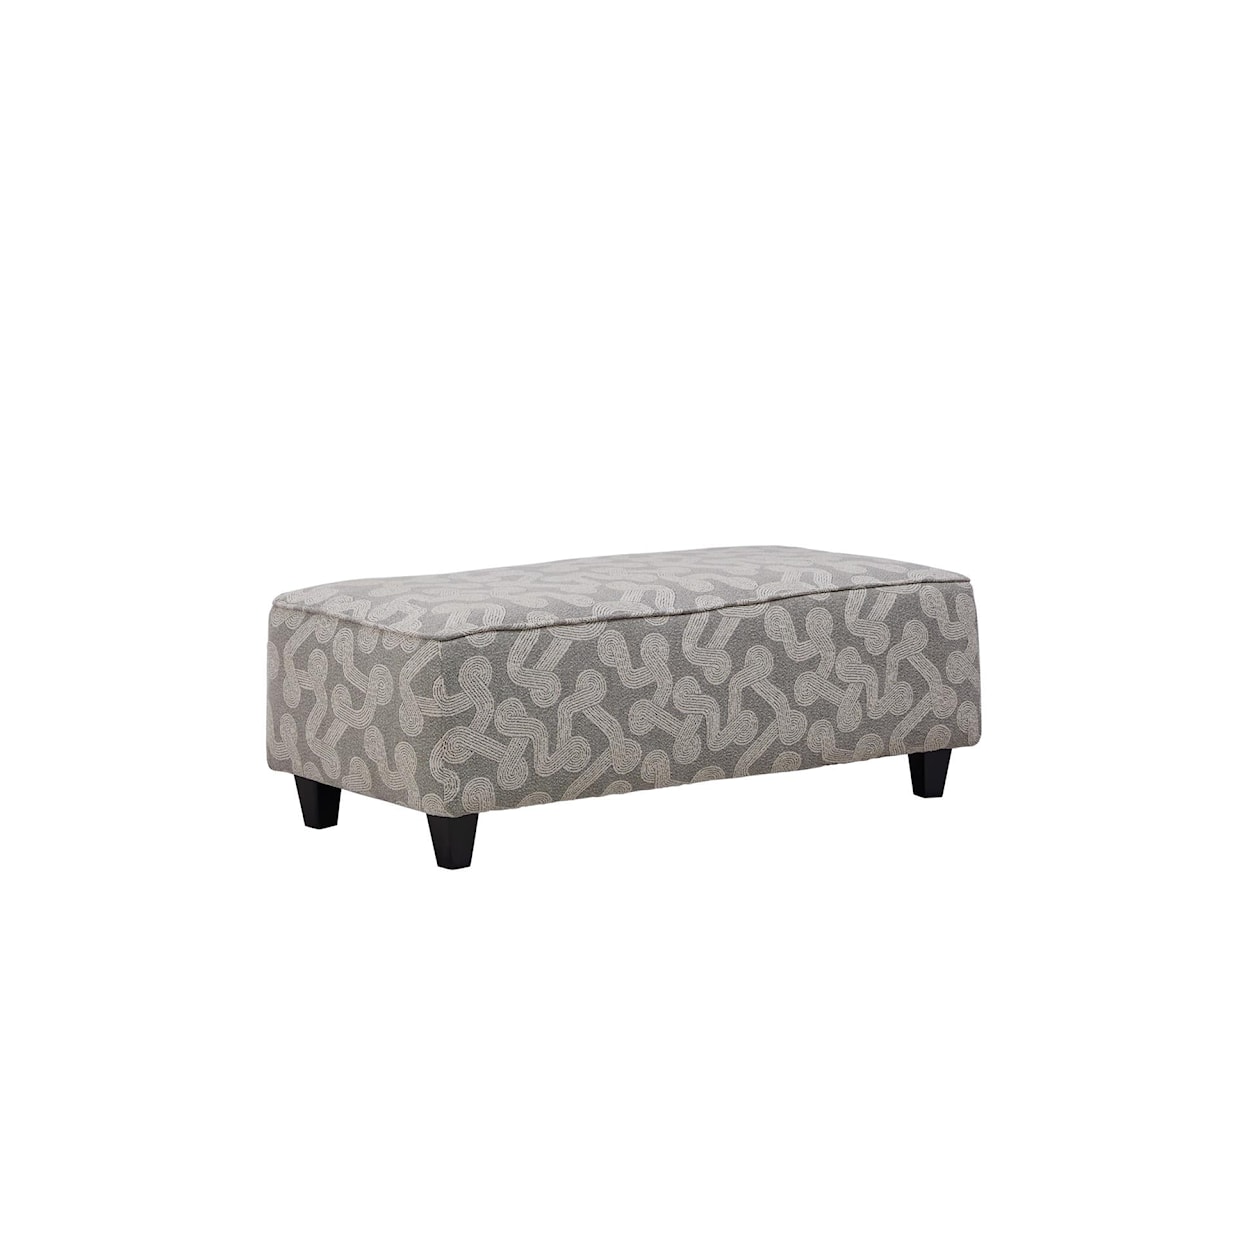 Fusion Furniture 3005 STANLEY SANDSTONE Cocktail Ottoman with Exposed Wooden Legs